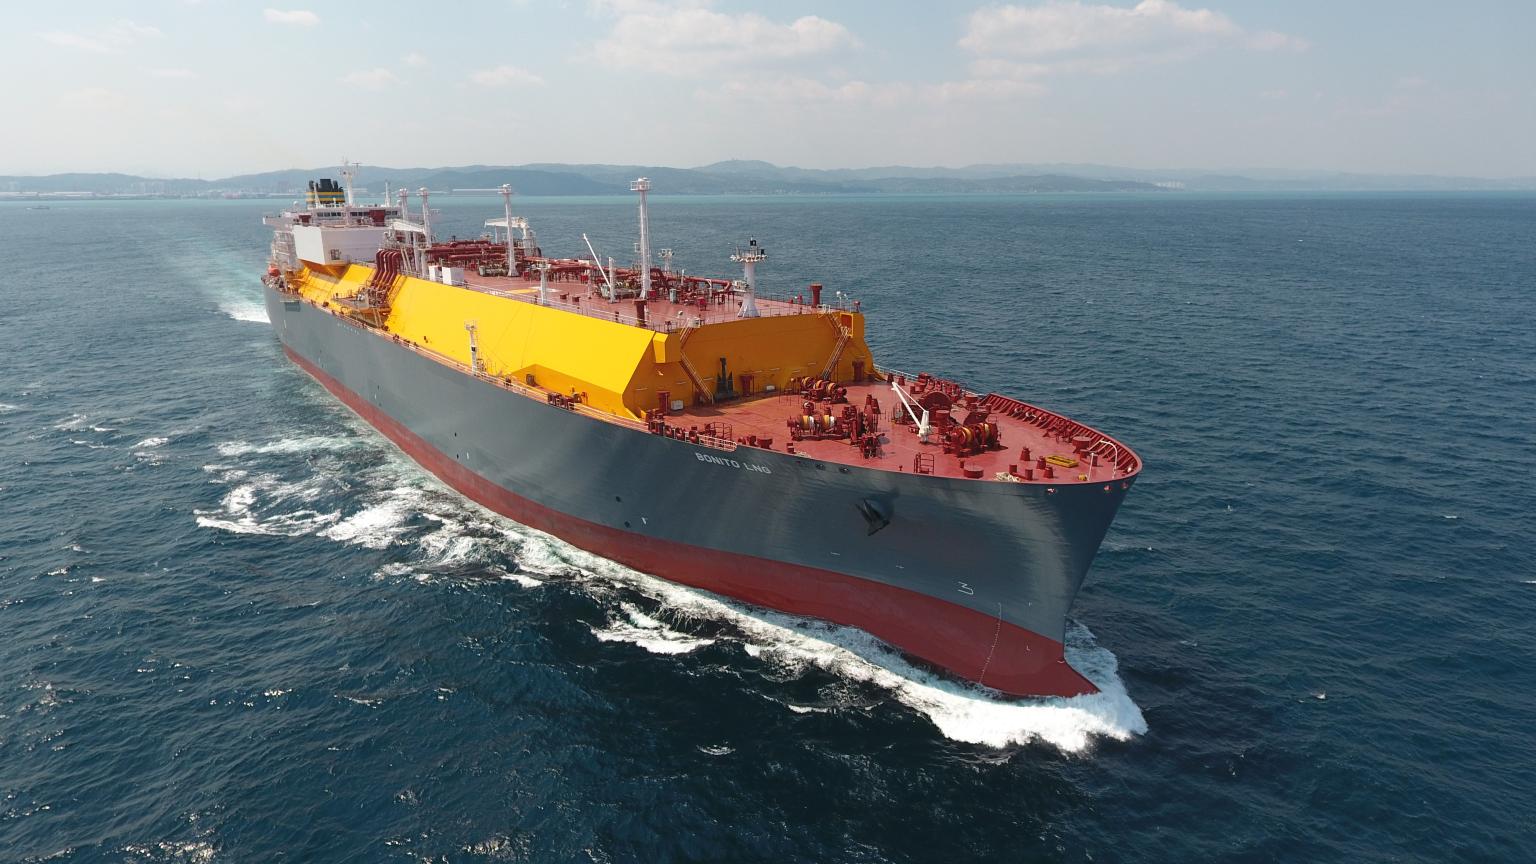 Seatrium Secures Favoured Customer Contract for LNG Carrier Repairs & Upgrades with TMS Cardiff Gas, Greece